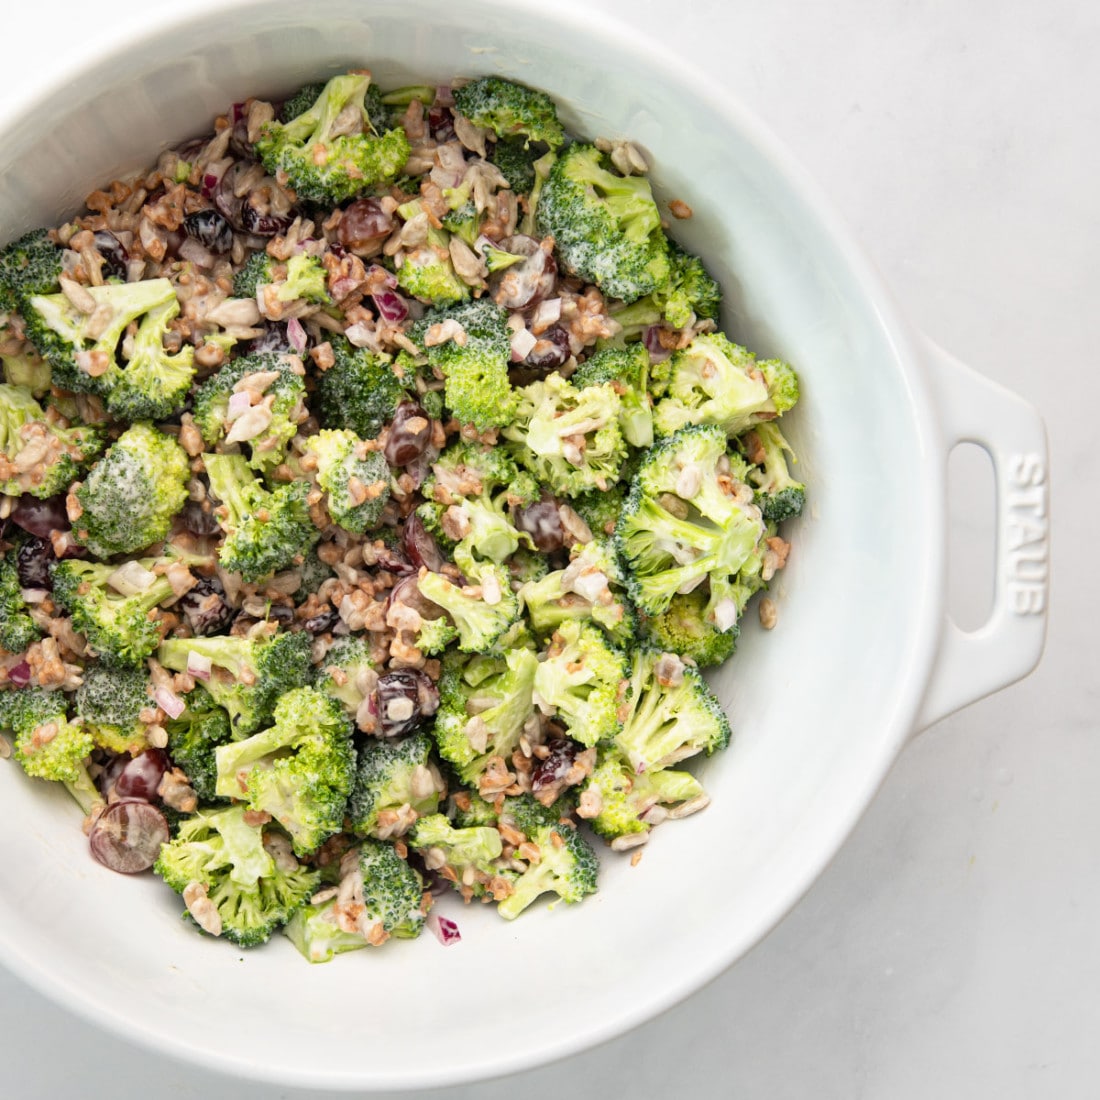 vegan broccoli salad with cranberries, sunflower seeds, grapes, and a creamy dressing